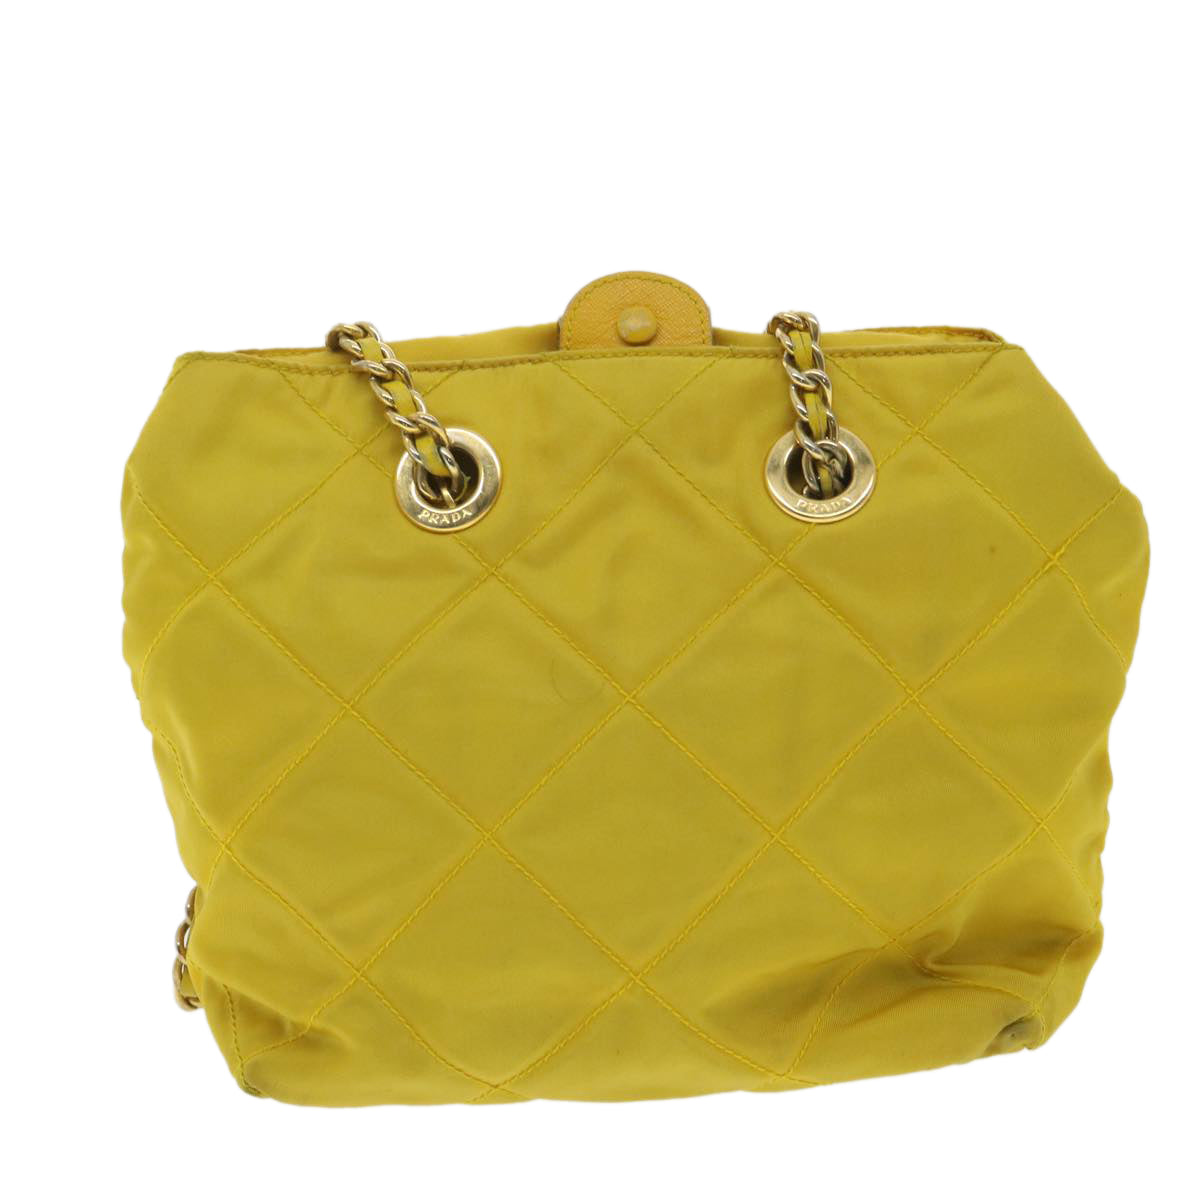 PRADA Nylon Quilted Chain Shoulder Bag Yellow Auth 34271 - 0